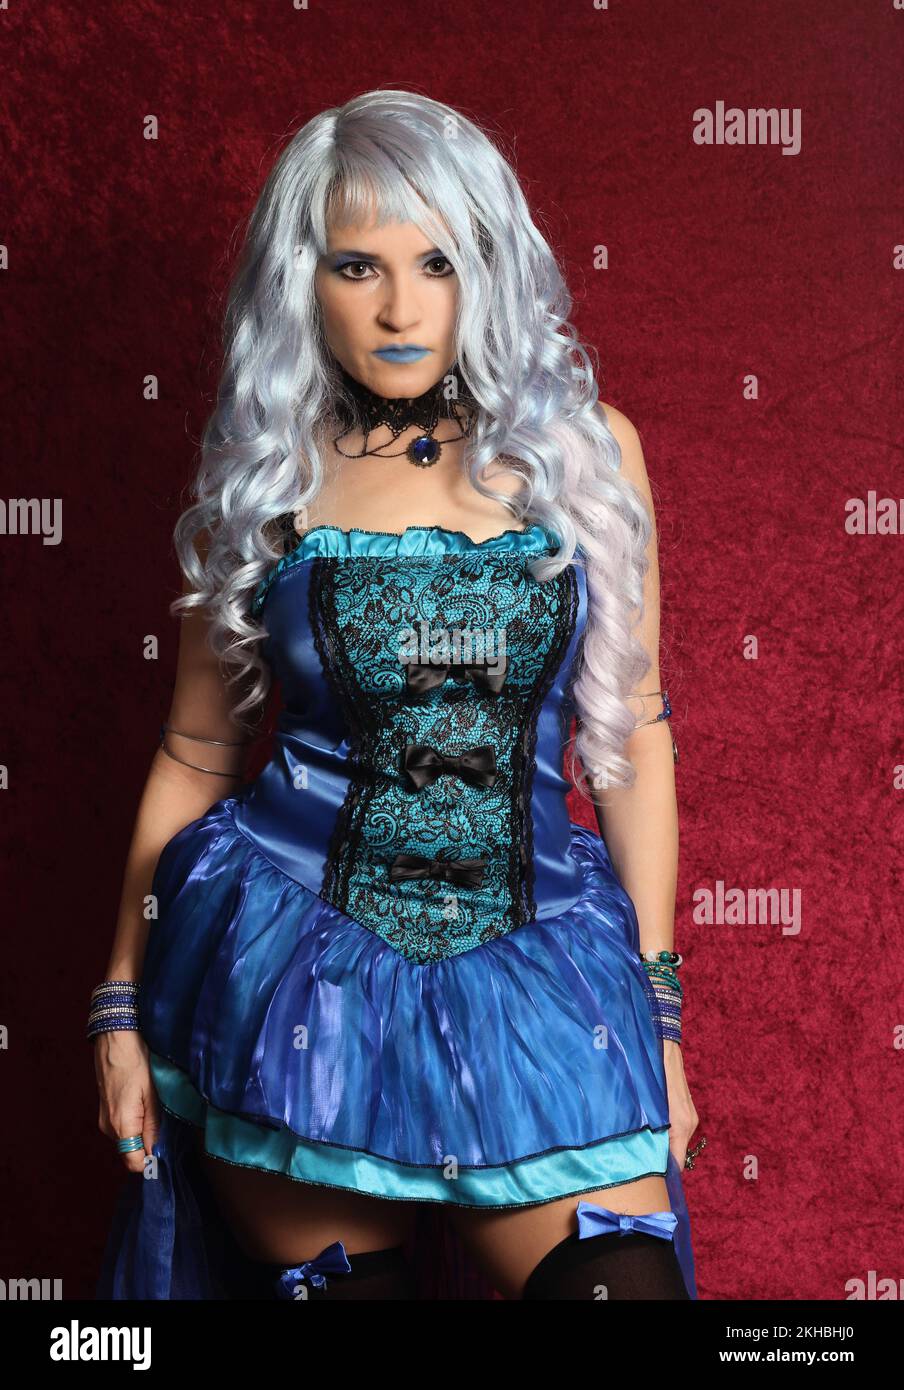 Woman With Blue Hair and Blue Corset Dress on Red Velvet Stock Photo